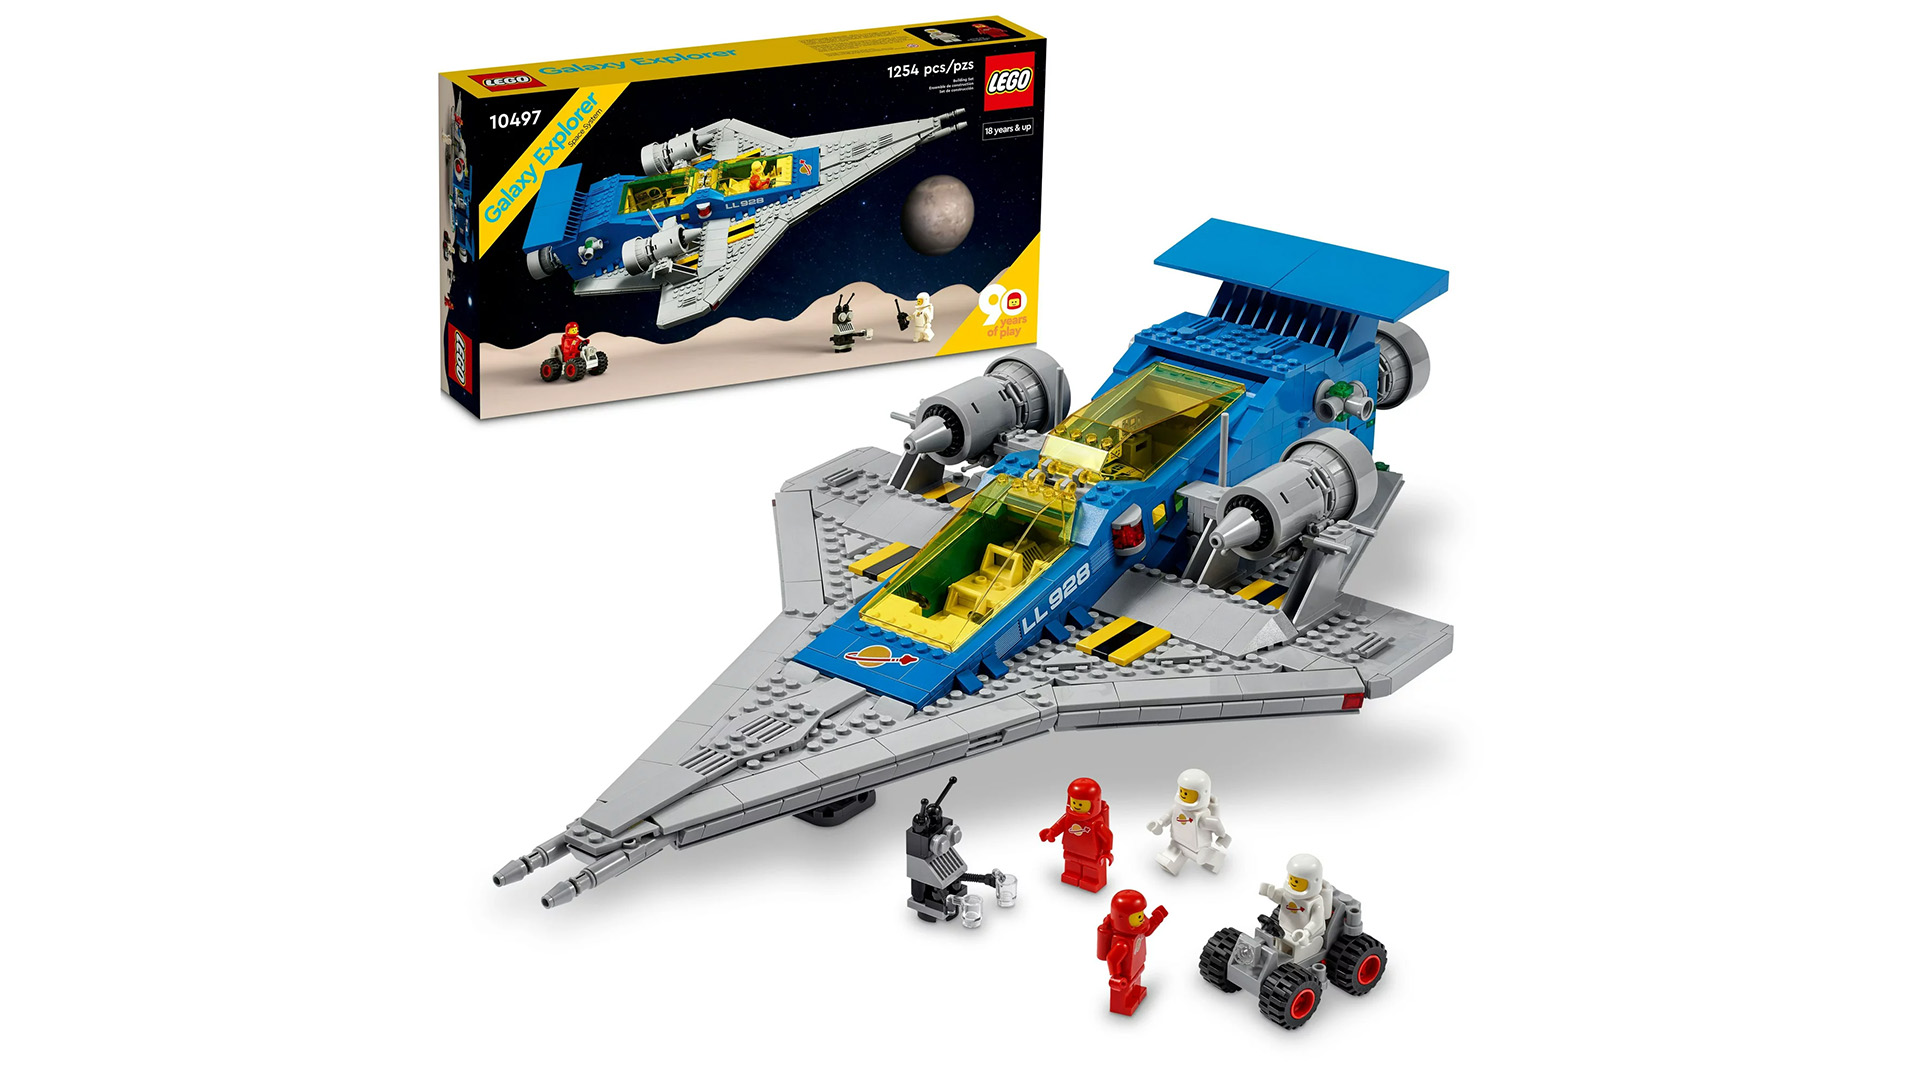 Save $25 on the retro Lego Galaxy Explorer in Black Friday deal at Walmart  | Space